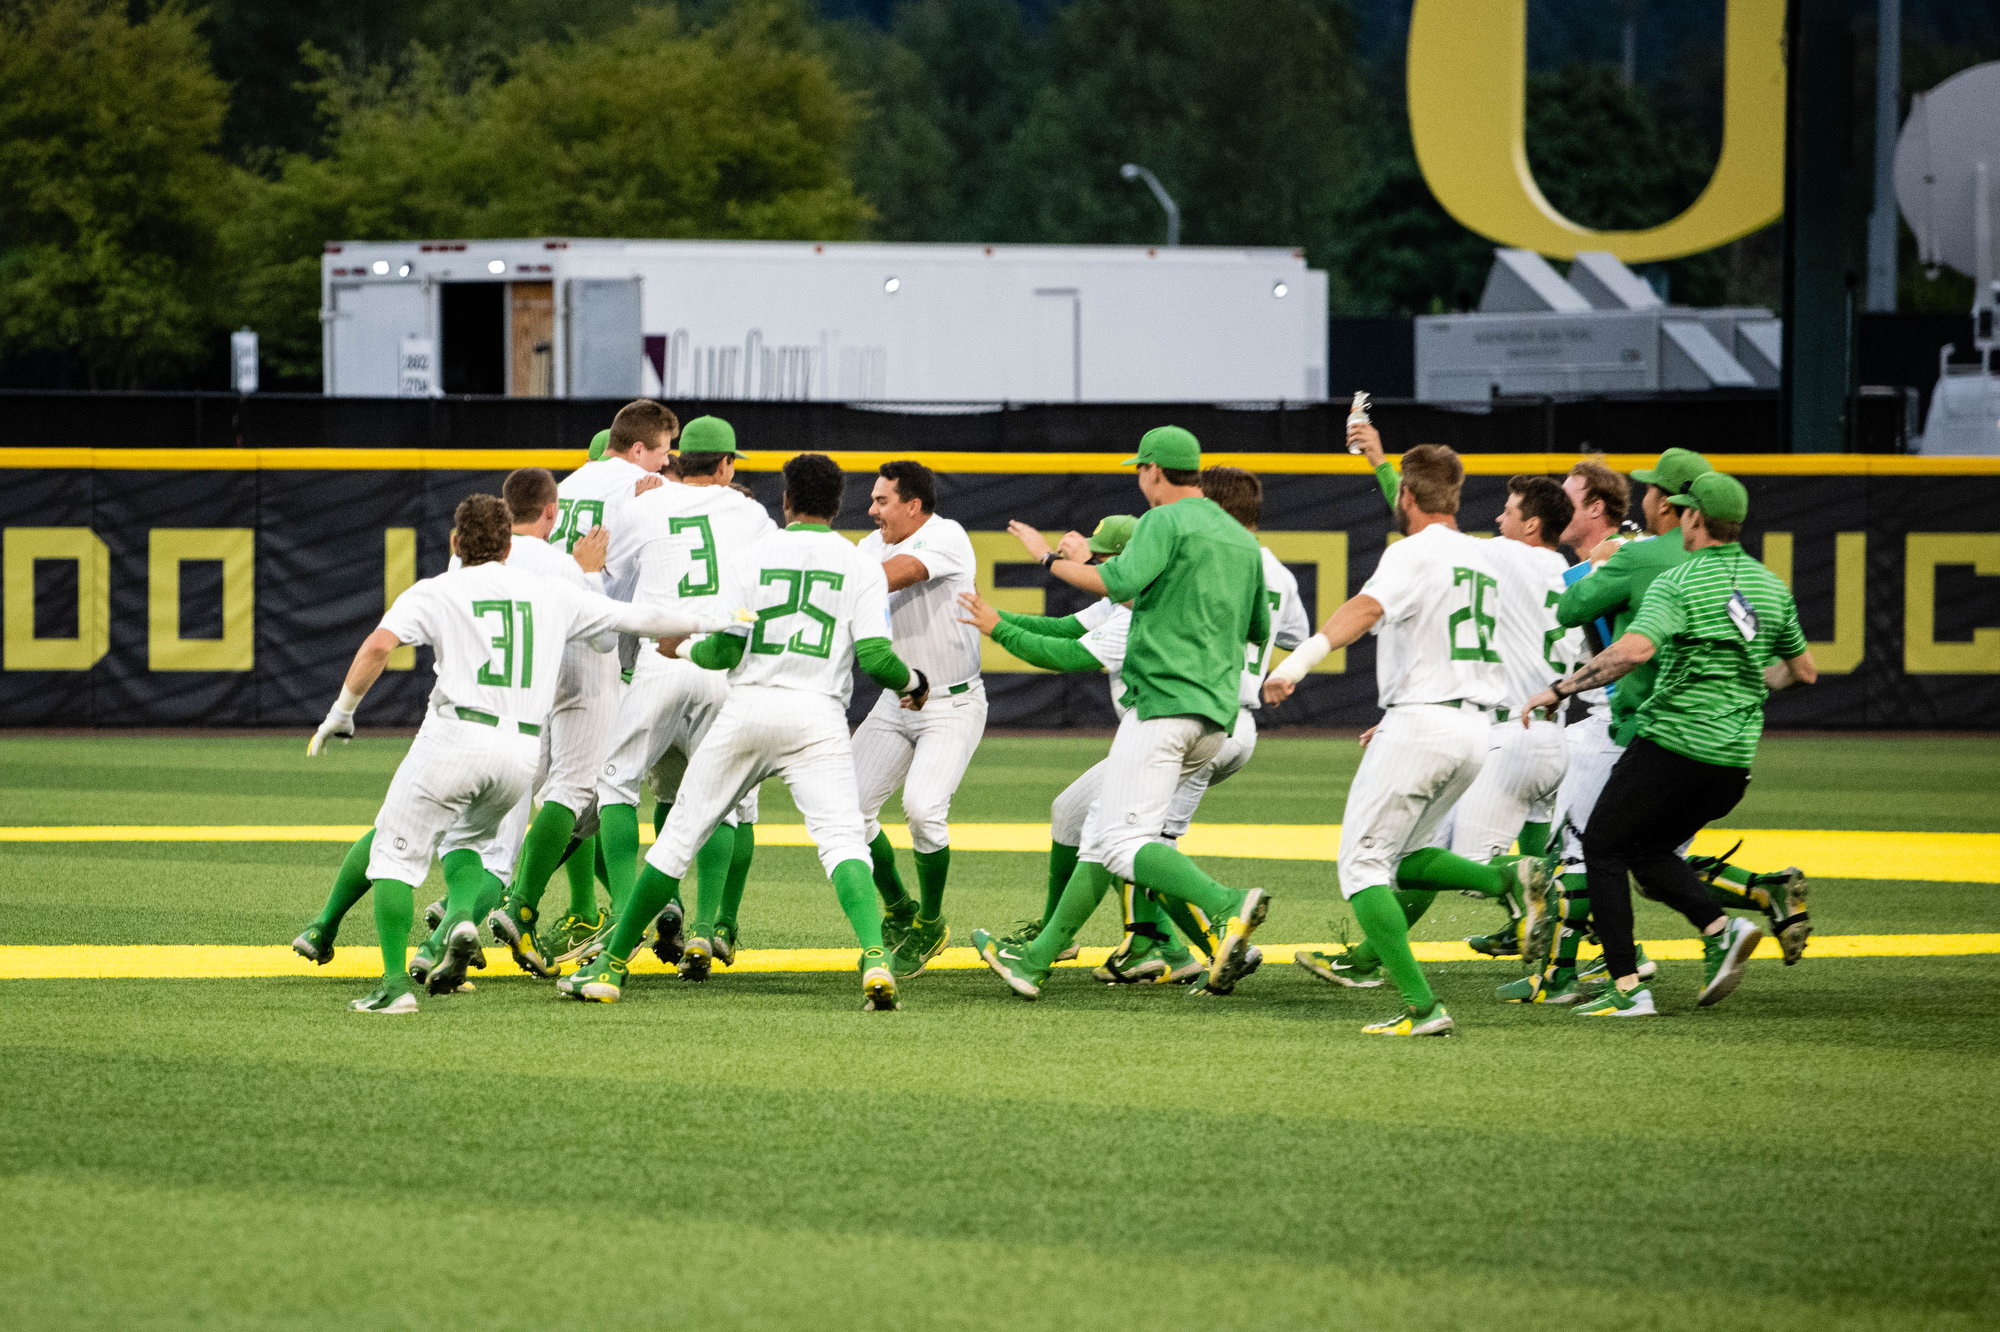 Walsh's 3-run double allows Oregon to hold off Vanderbilt, 8-7 in